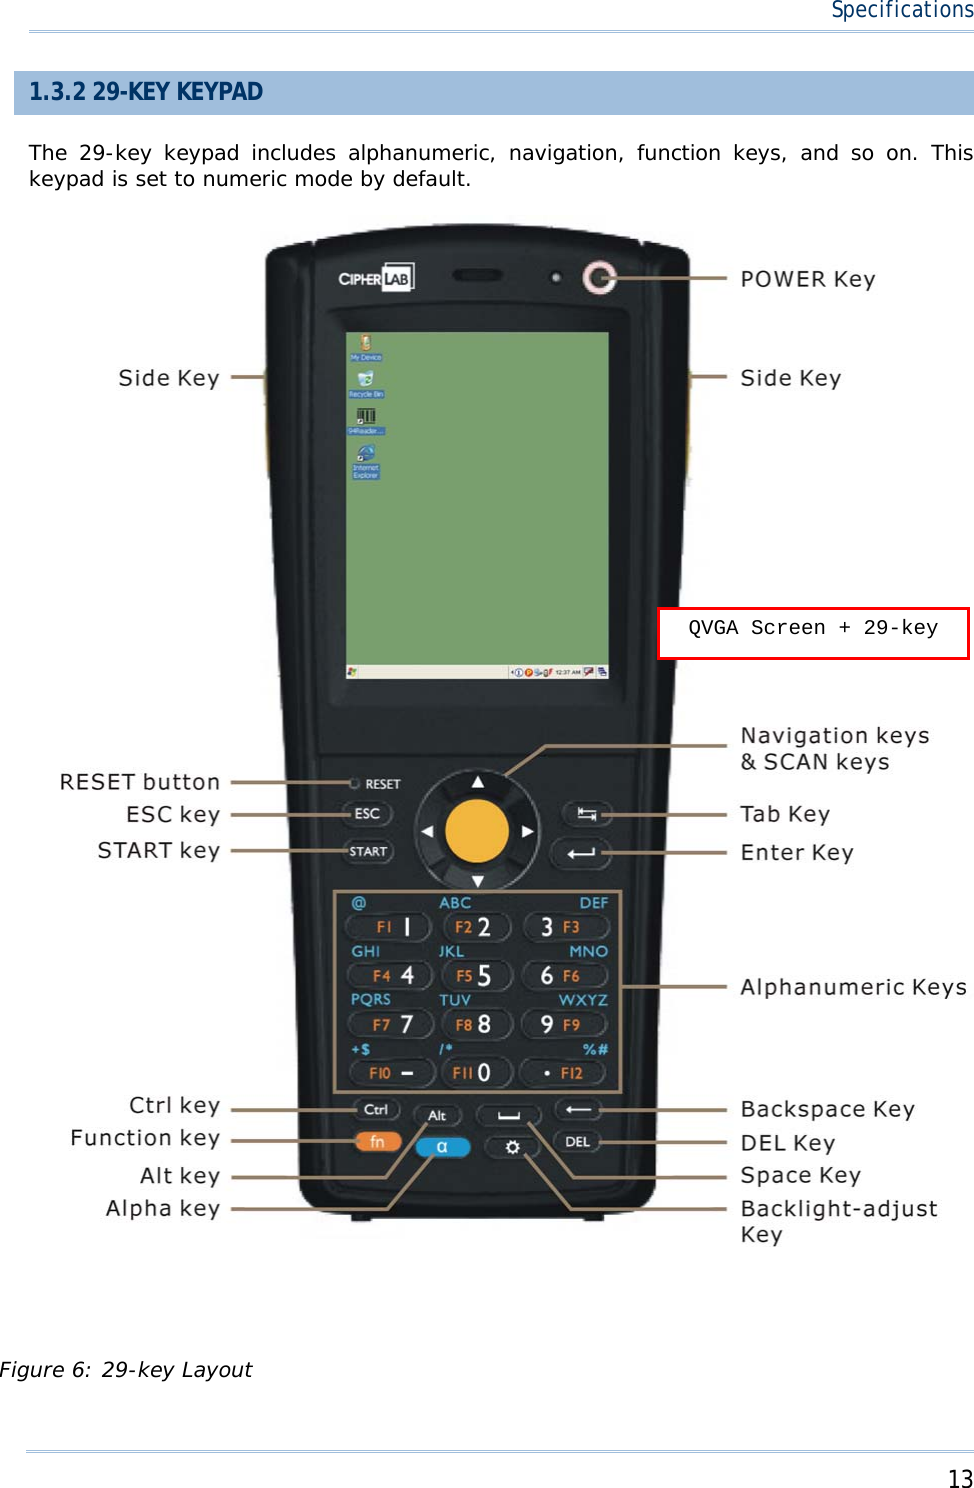     13   Specifications  1.3.2 29-KEY KEYPAD The 29-key keypad includes alphanumeric, navigation, function keys, and so on. This keypad is set to numeric mode by default.  QVGA Screen + 29-key  Figure 6: 29-key Layout 